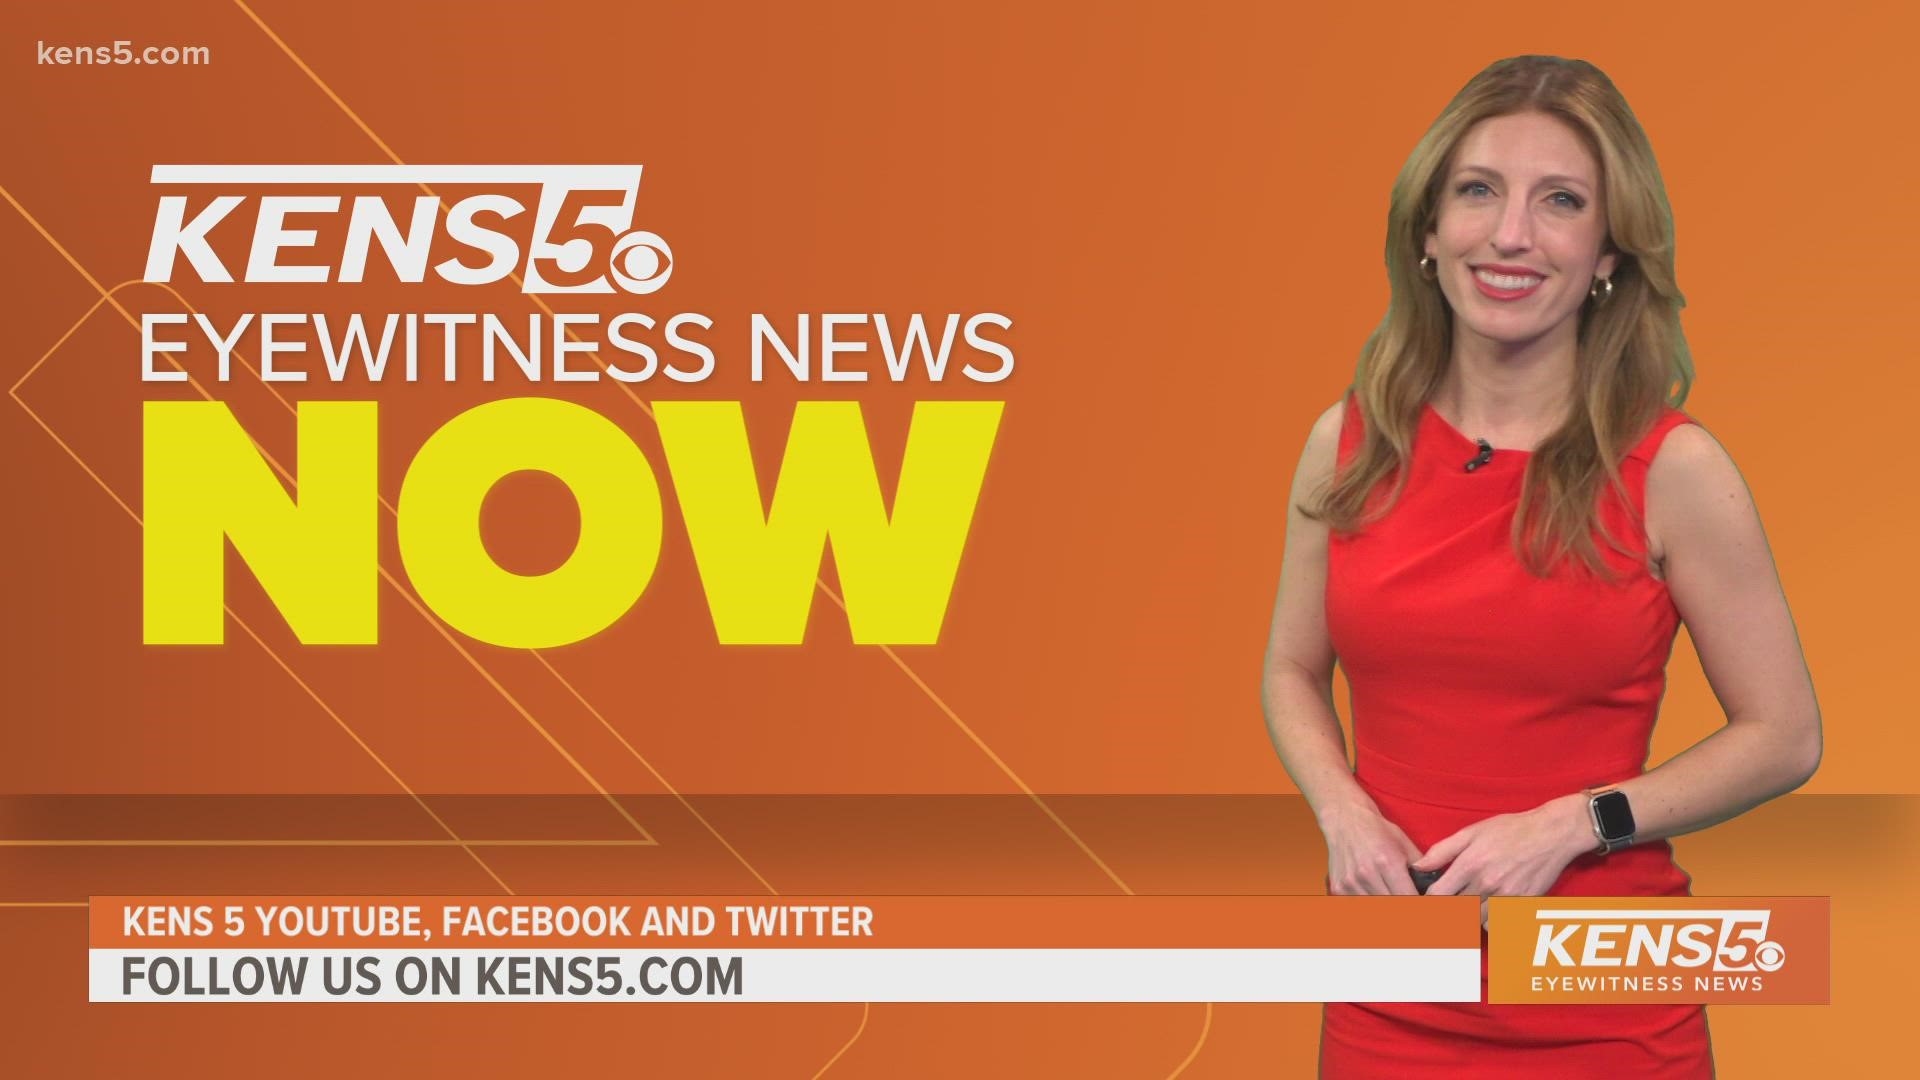 Follow us here to get the latest with KENS 5's Sarah Forgany every weekday.